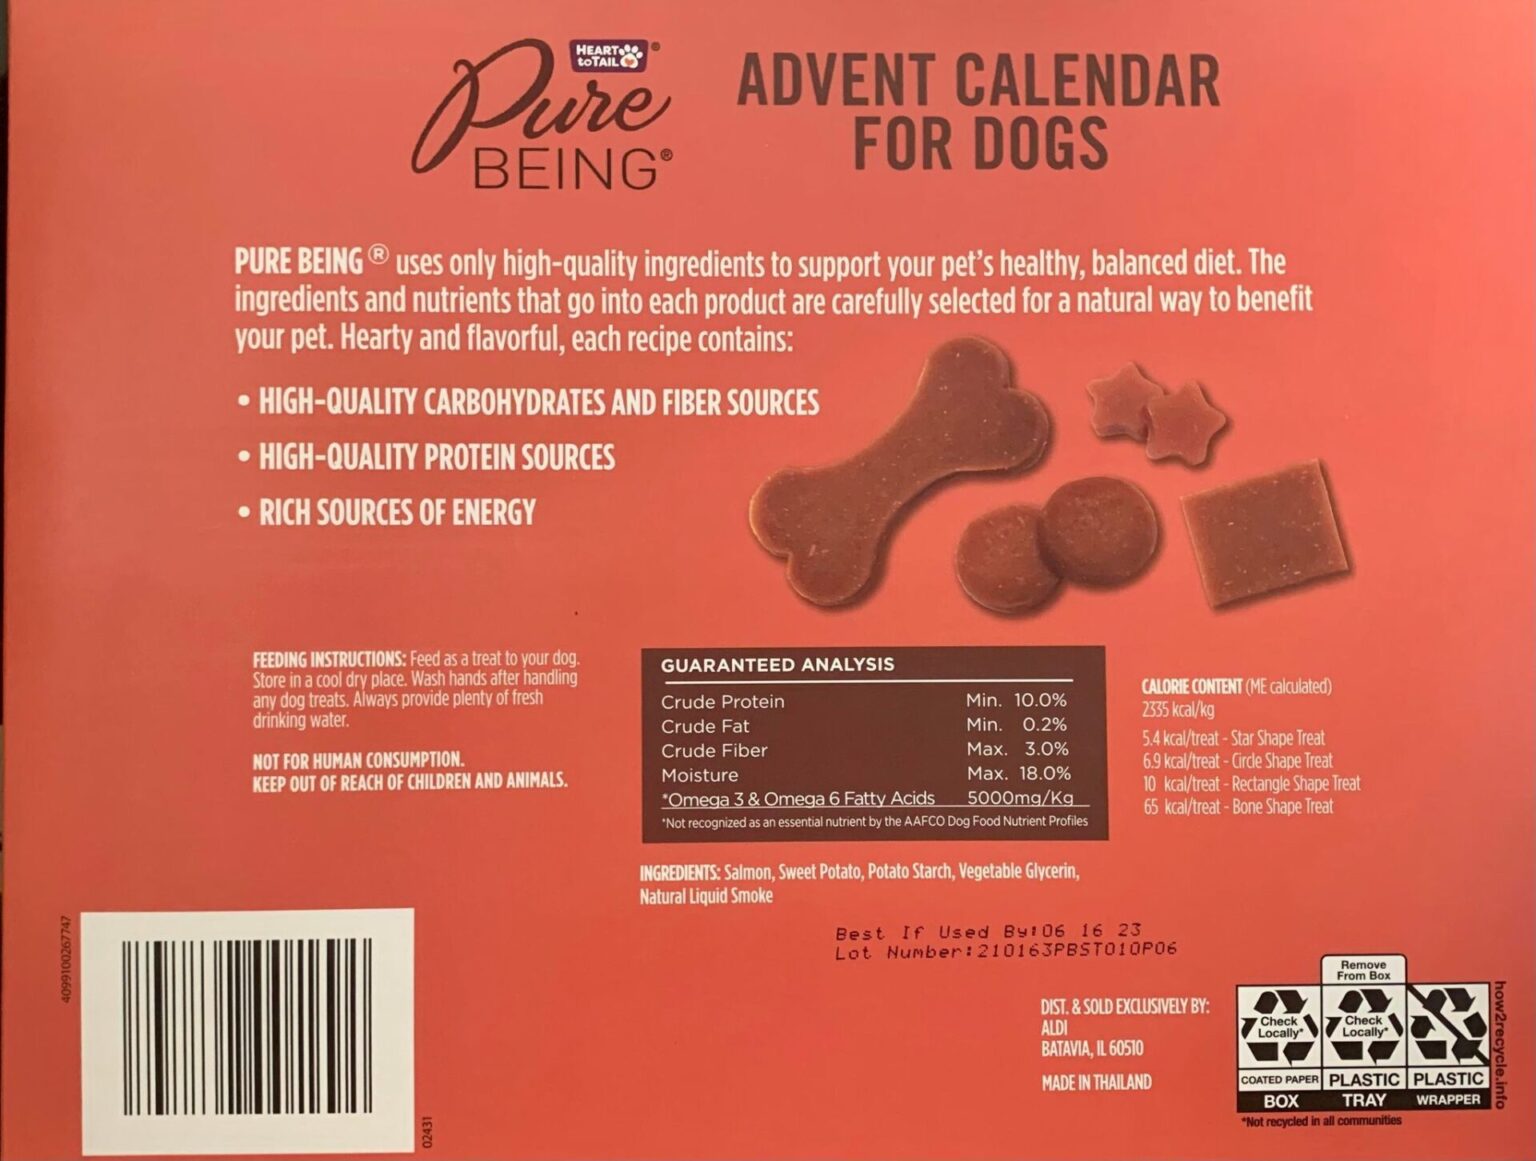 Heart to Tail Pure Being Advent Calendar for Dogs ALDI REVIEWER